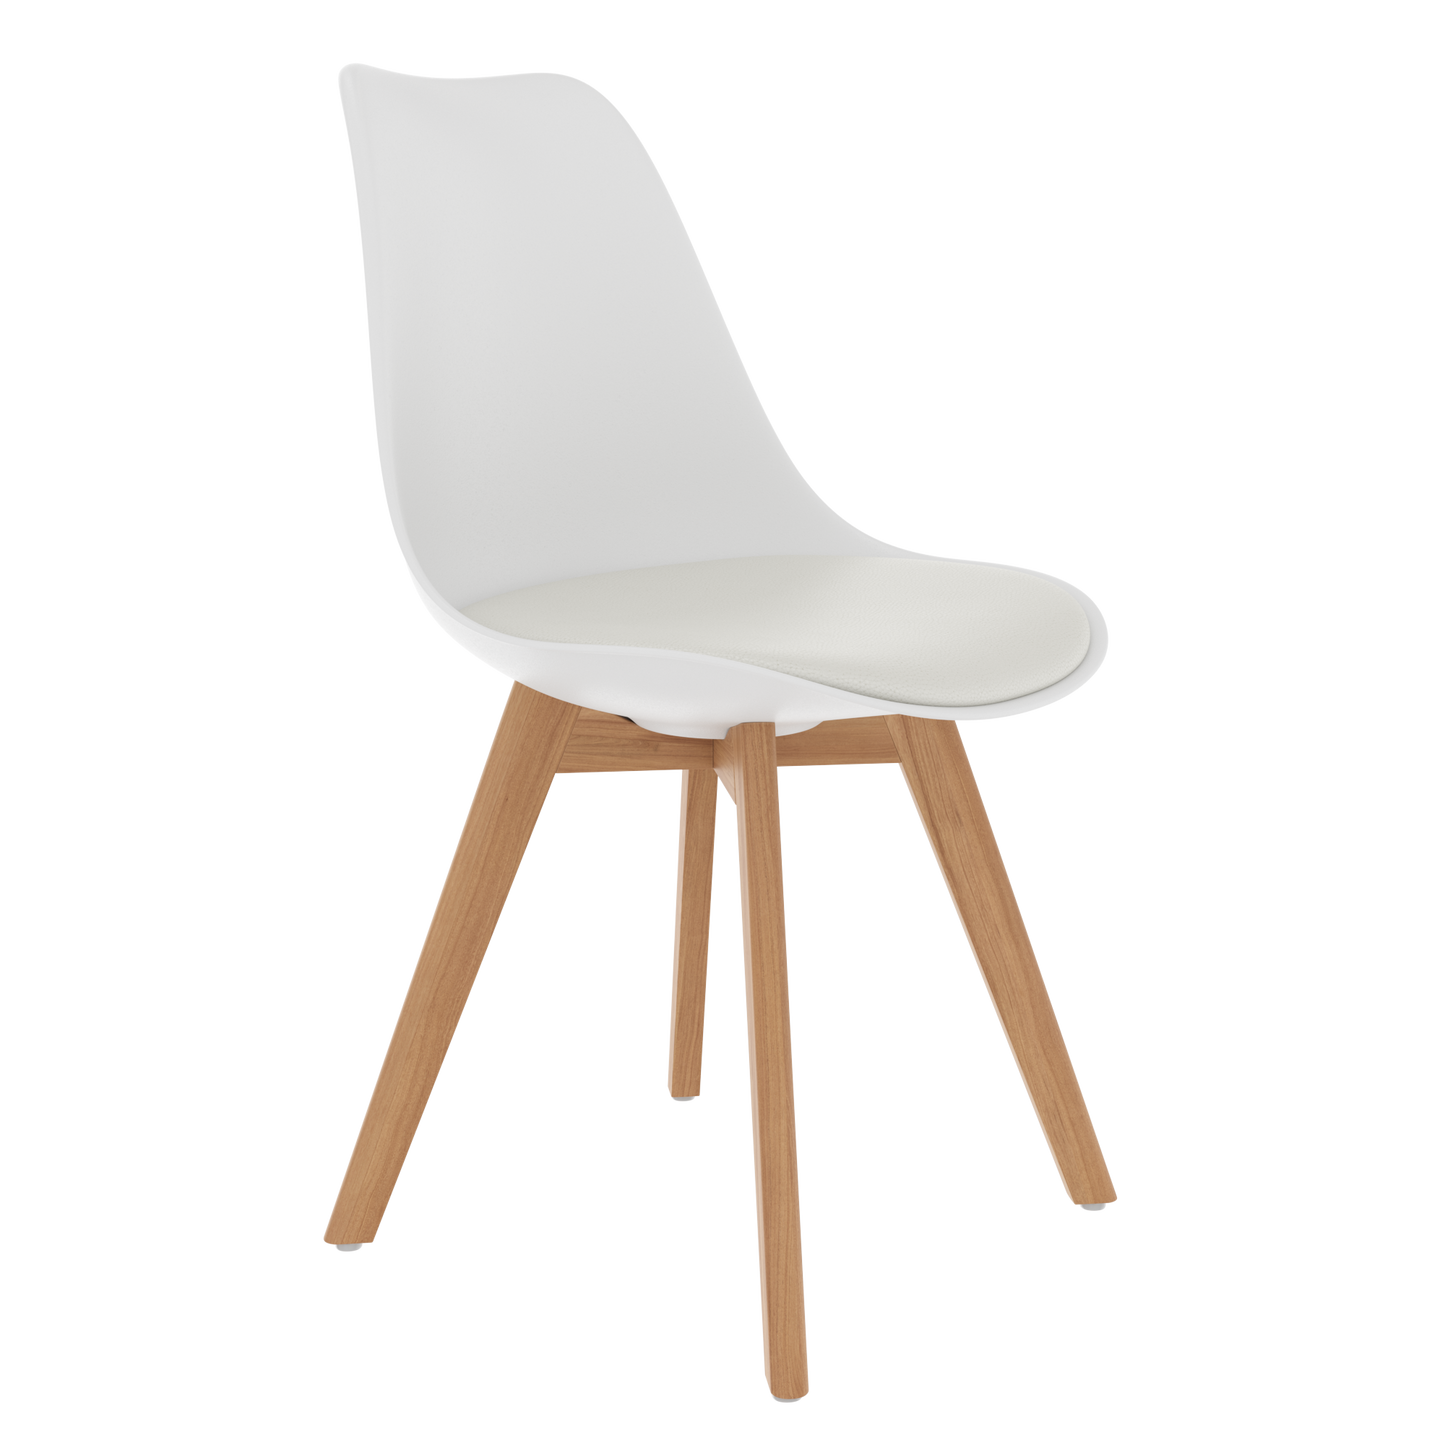 CHOTTO - Ando Dining Chairs - White x 2